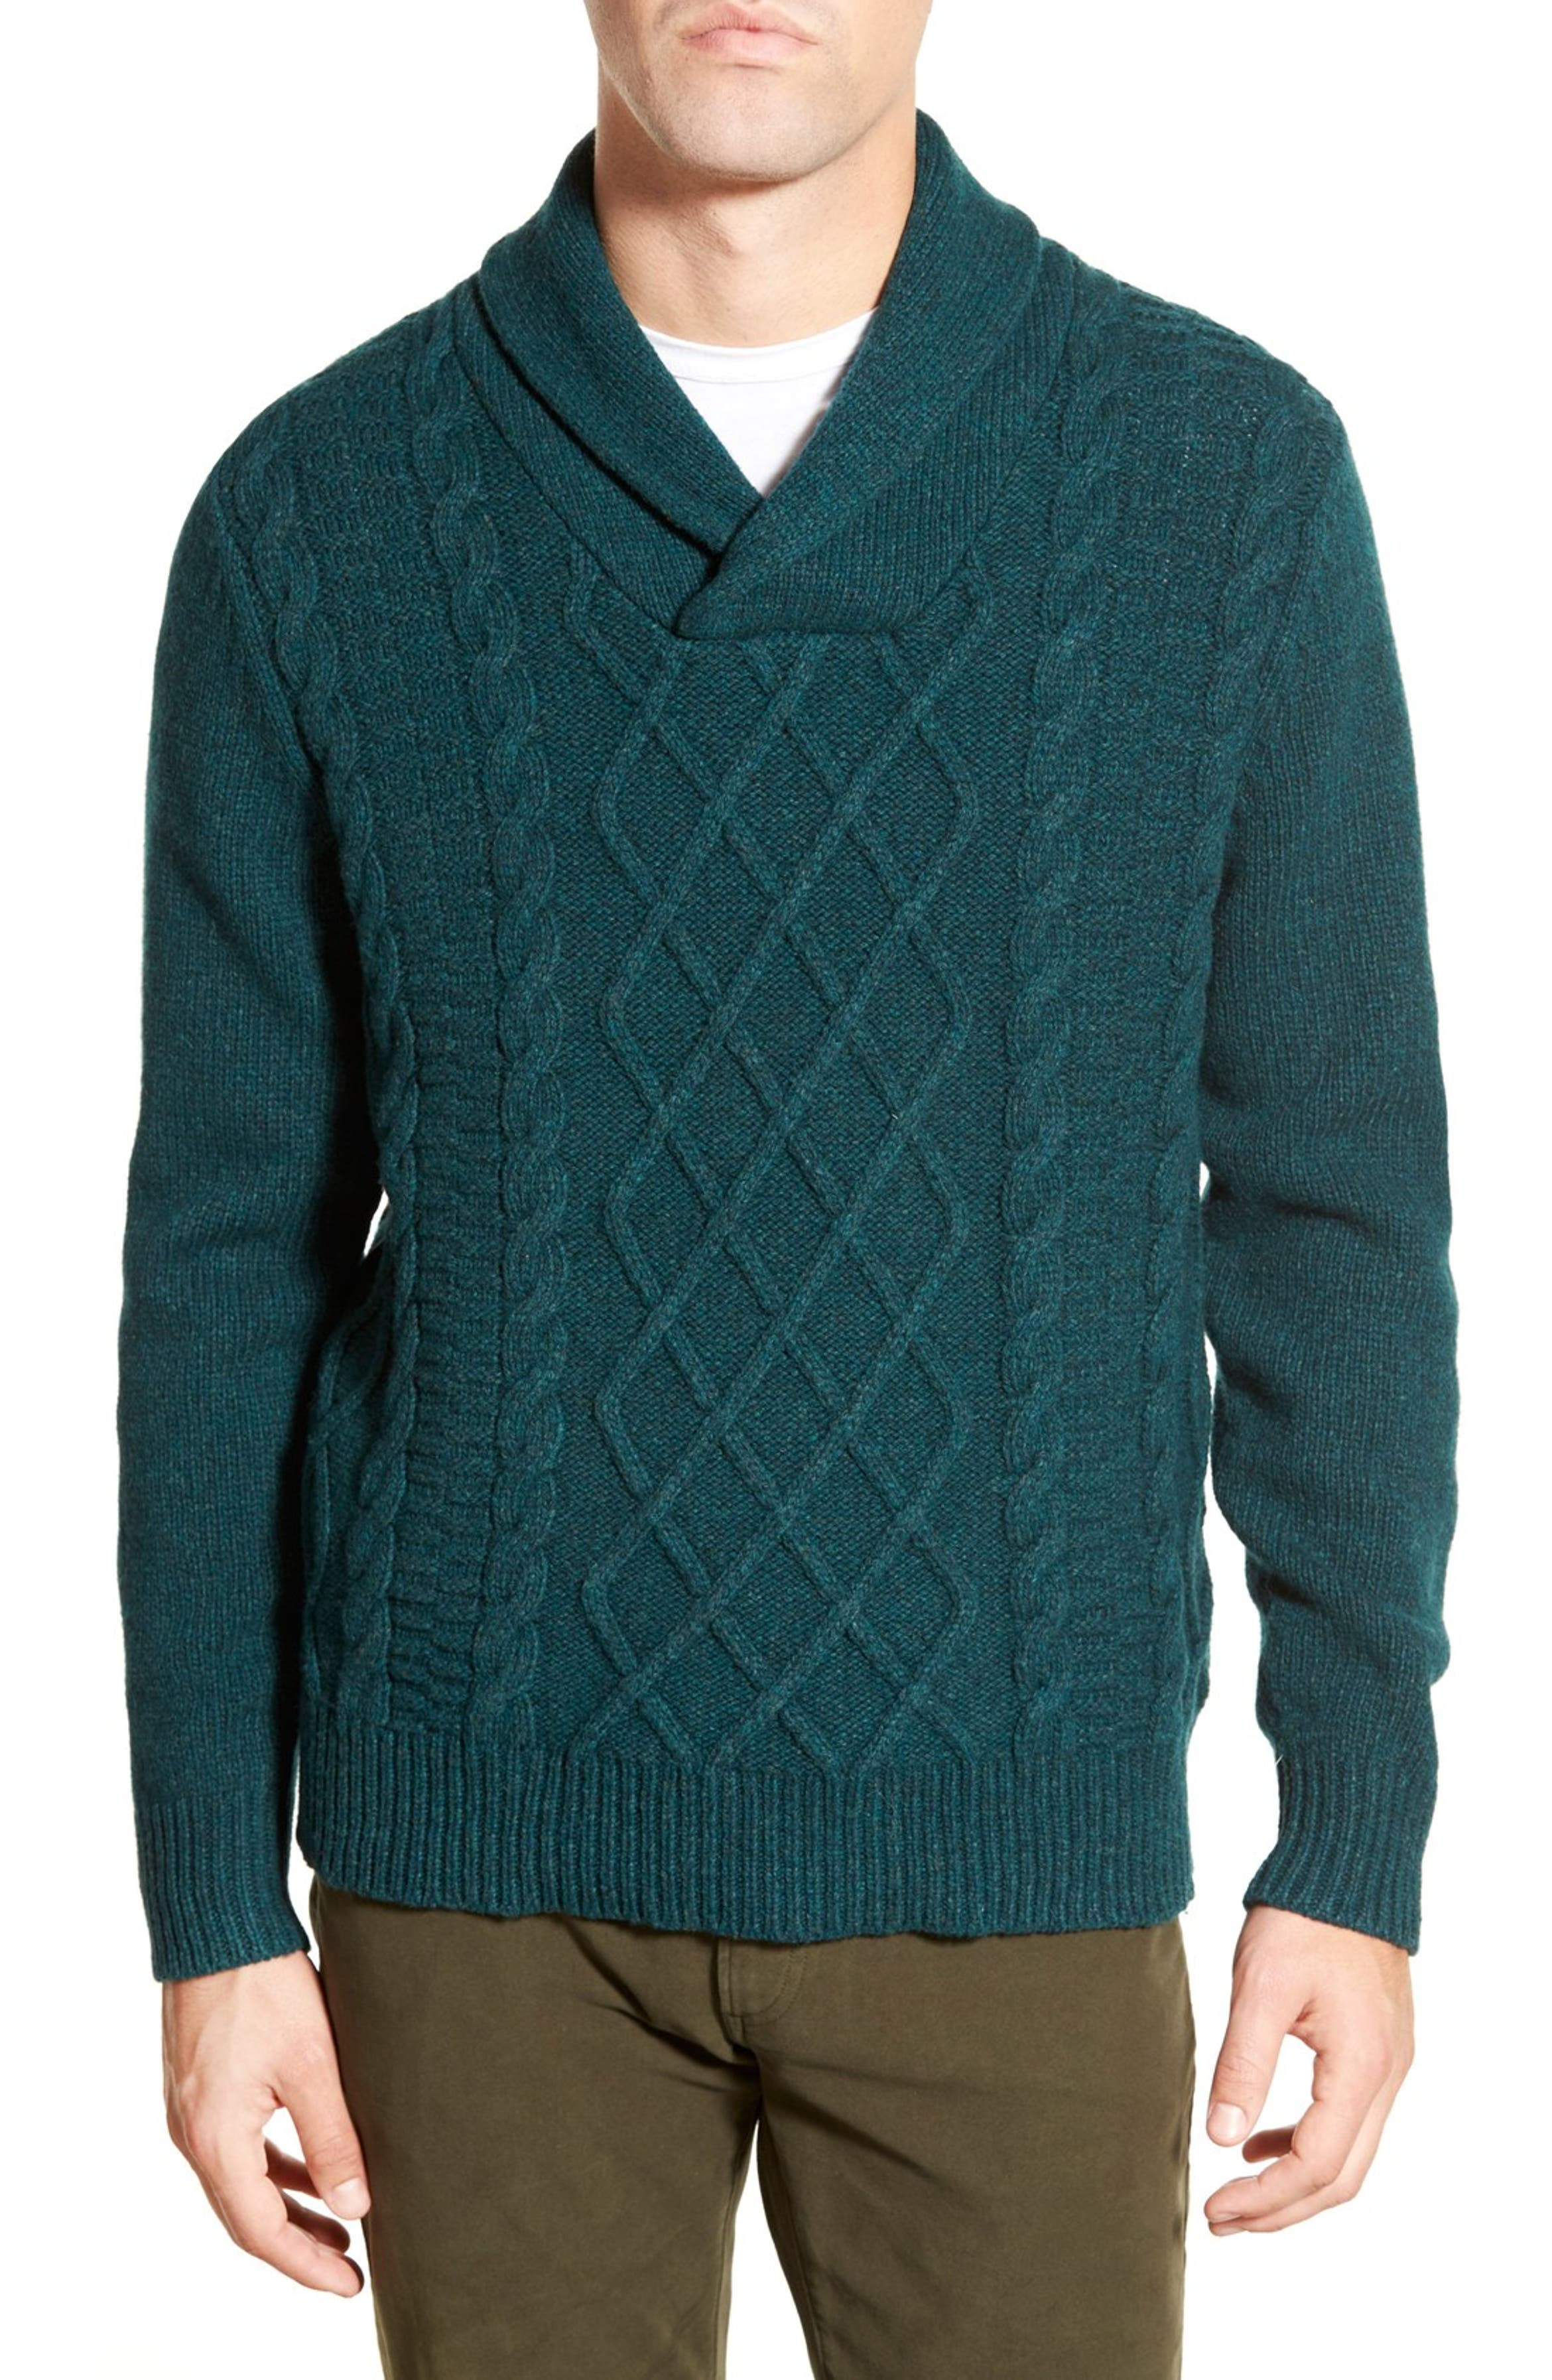 Bonobos Shawl Cable Knit Sweater | Nordstrom